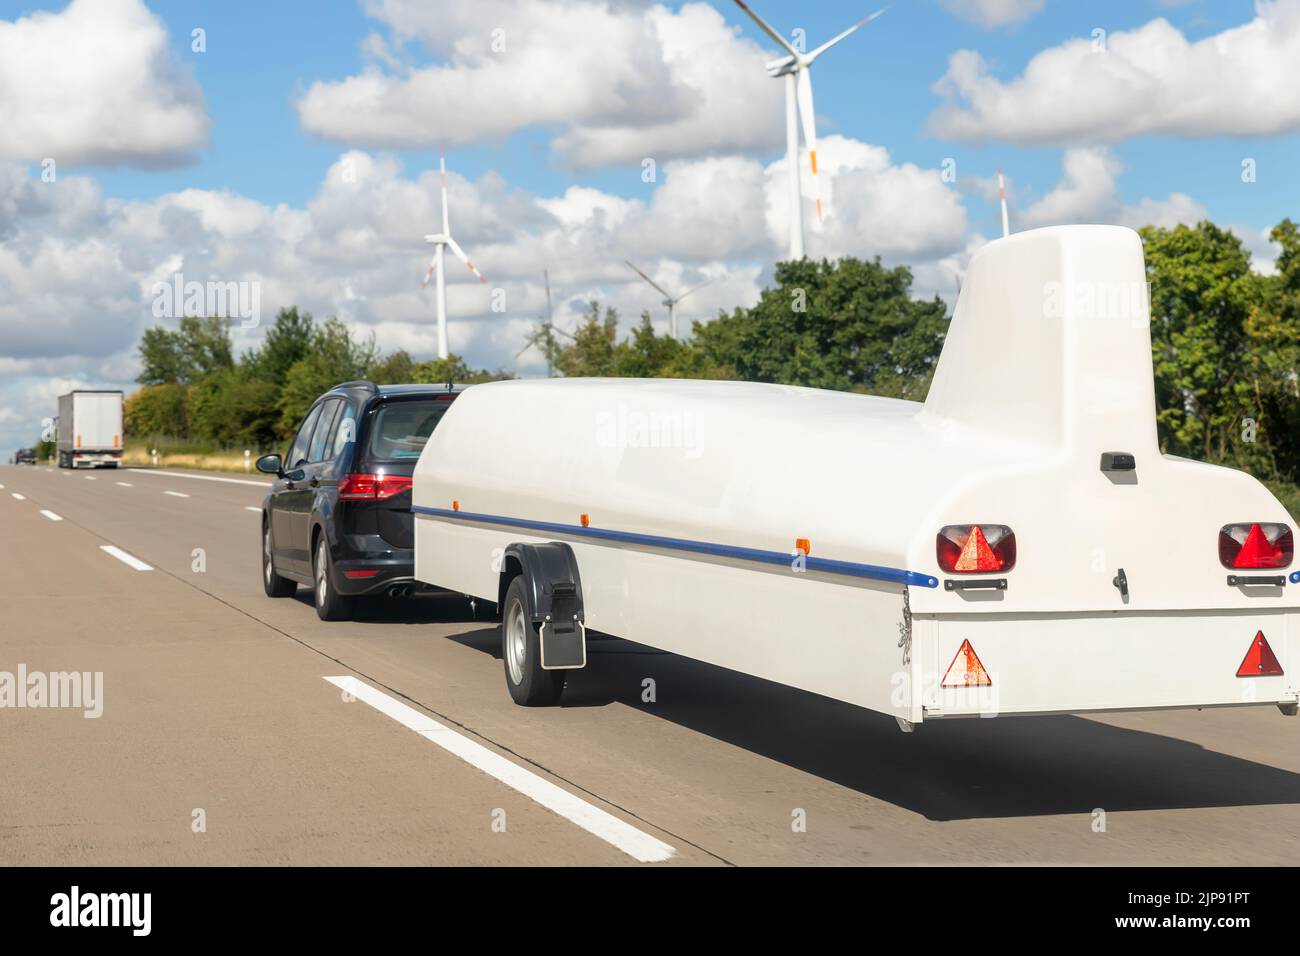 Big white disassembled glider plane in cover box on trailer towed by van or suv on highweay road sunny day against blue sky. Sailplane equipment Stock Photo